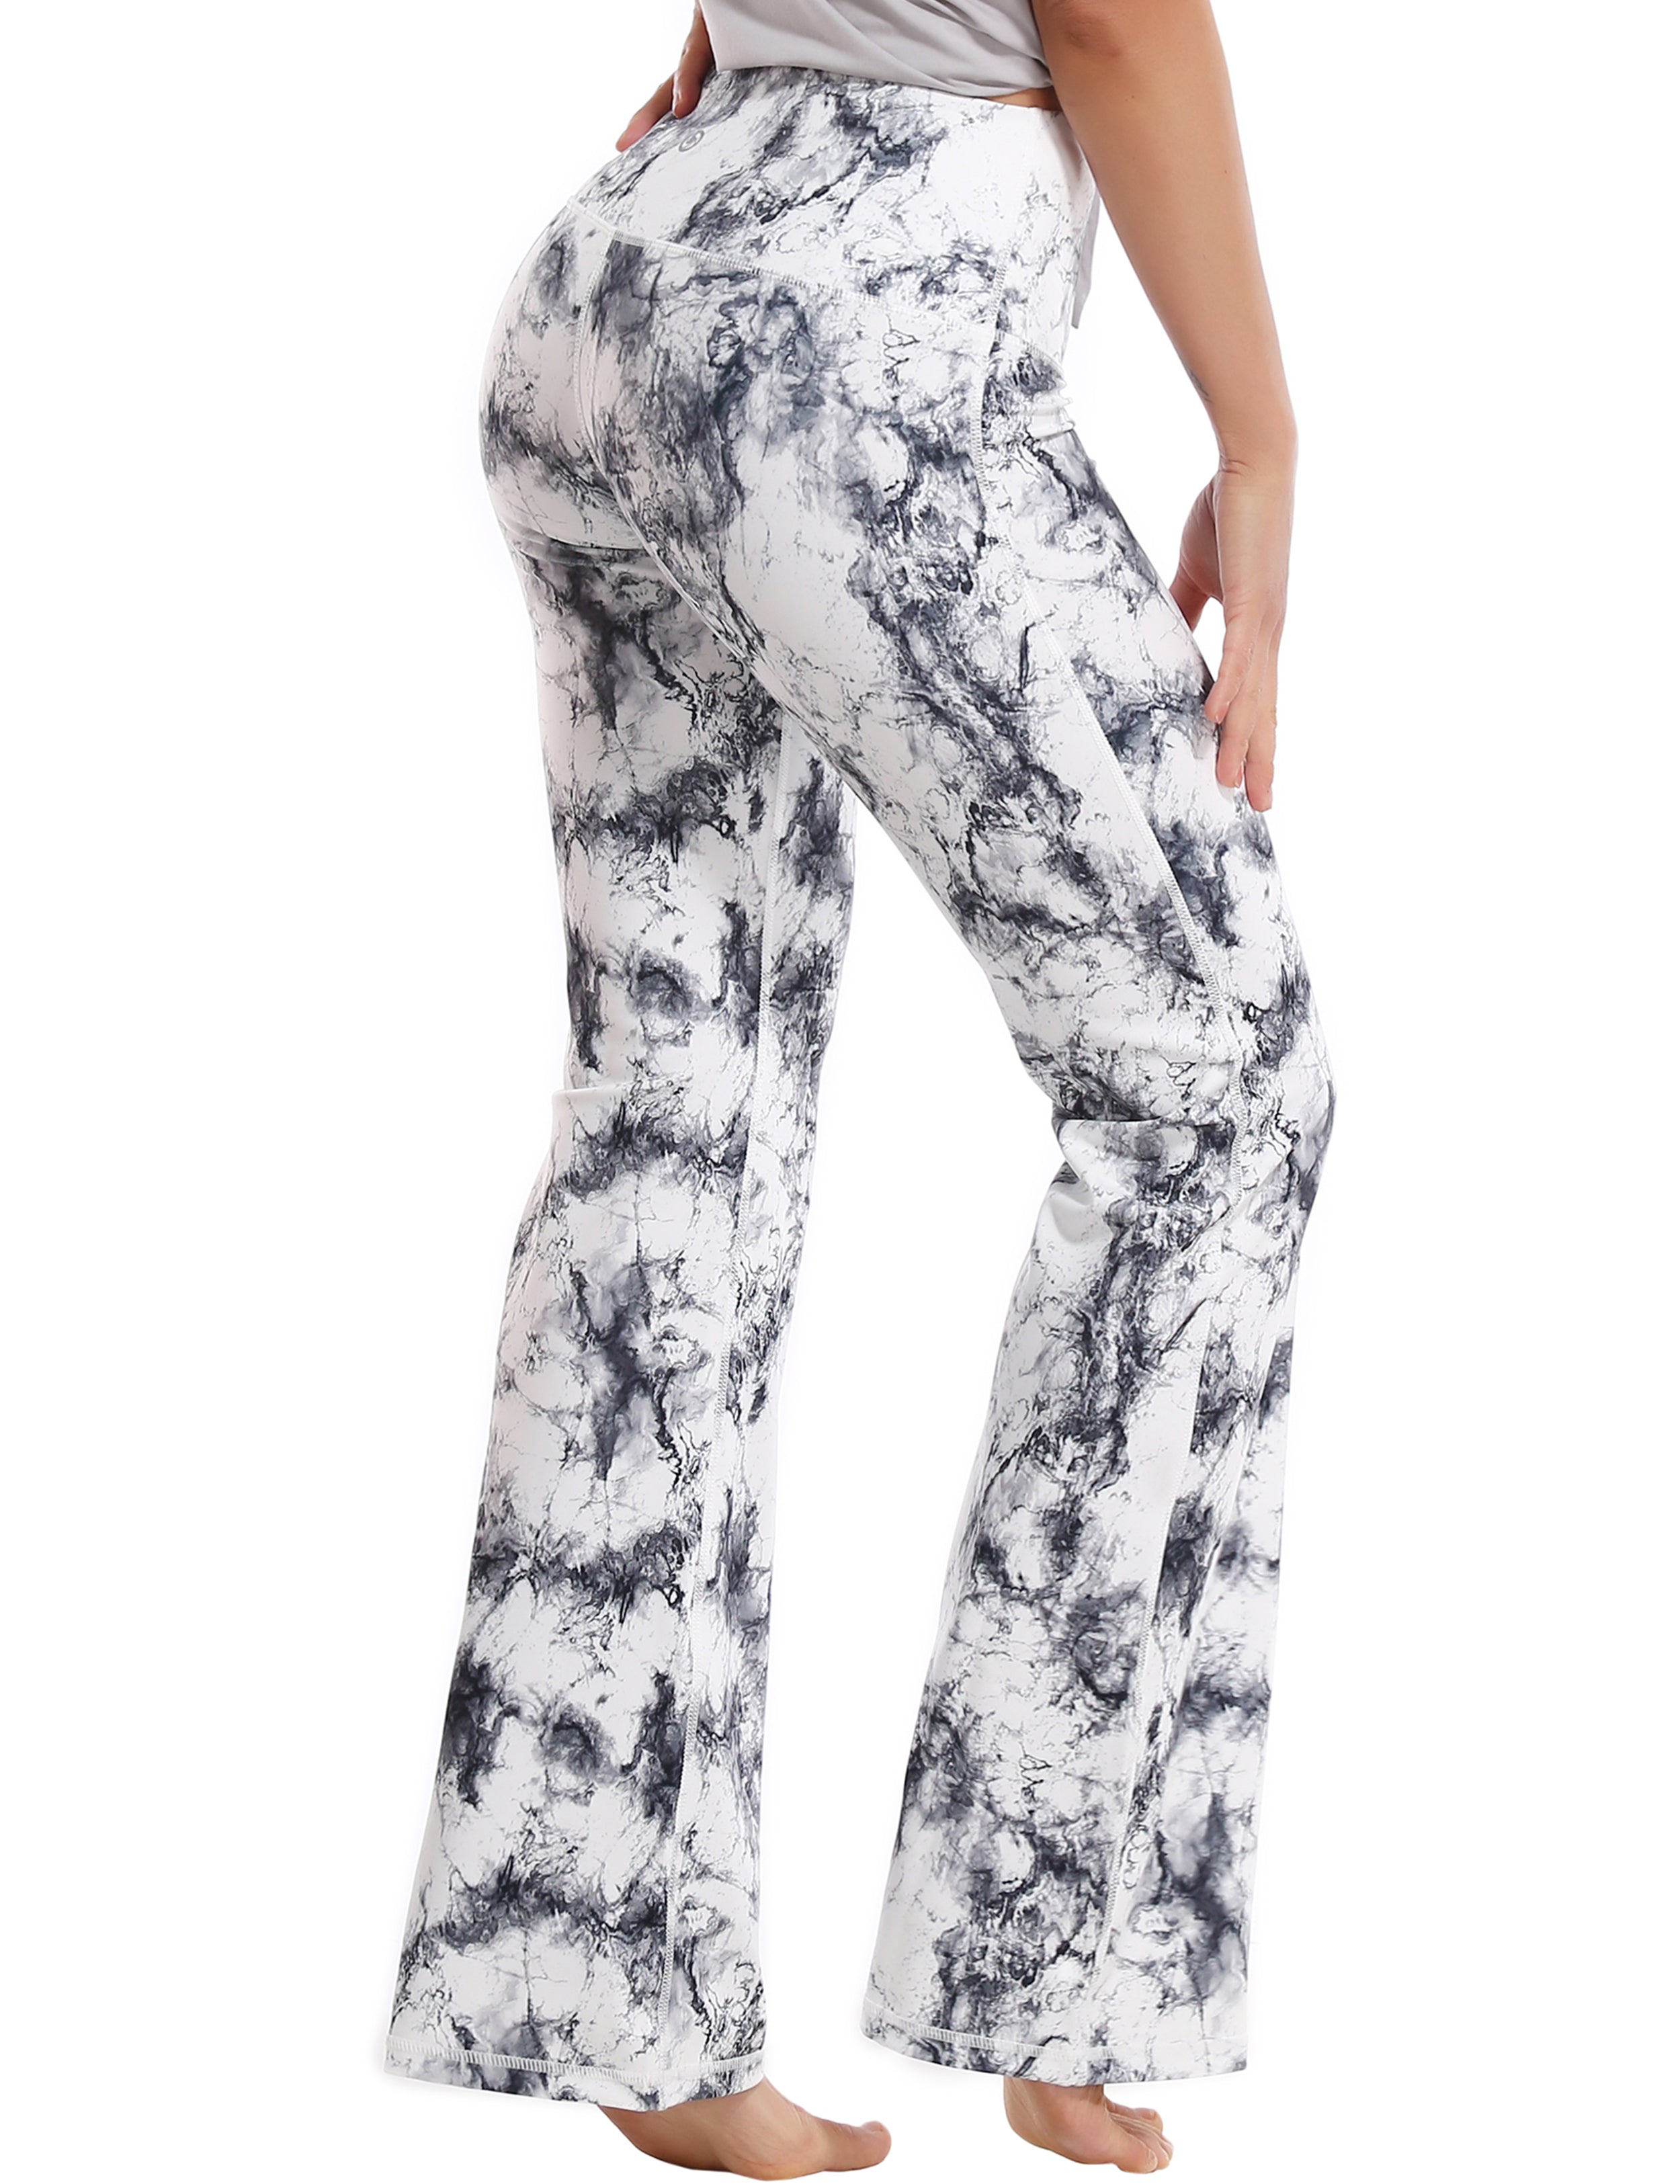 High Waist Printed Bootcut Leggings Arabescato 78%Polyester/22%Spandex Fabric doesn't attract lint easily 4-way stretch No see-through Moisture-wicking Tummy control Inner pocket Five lengths